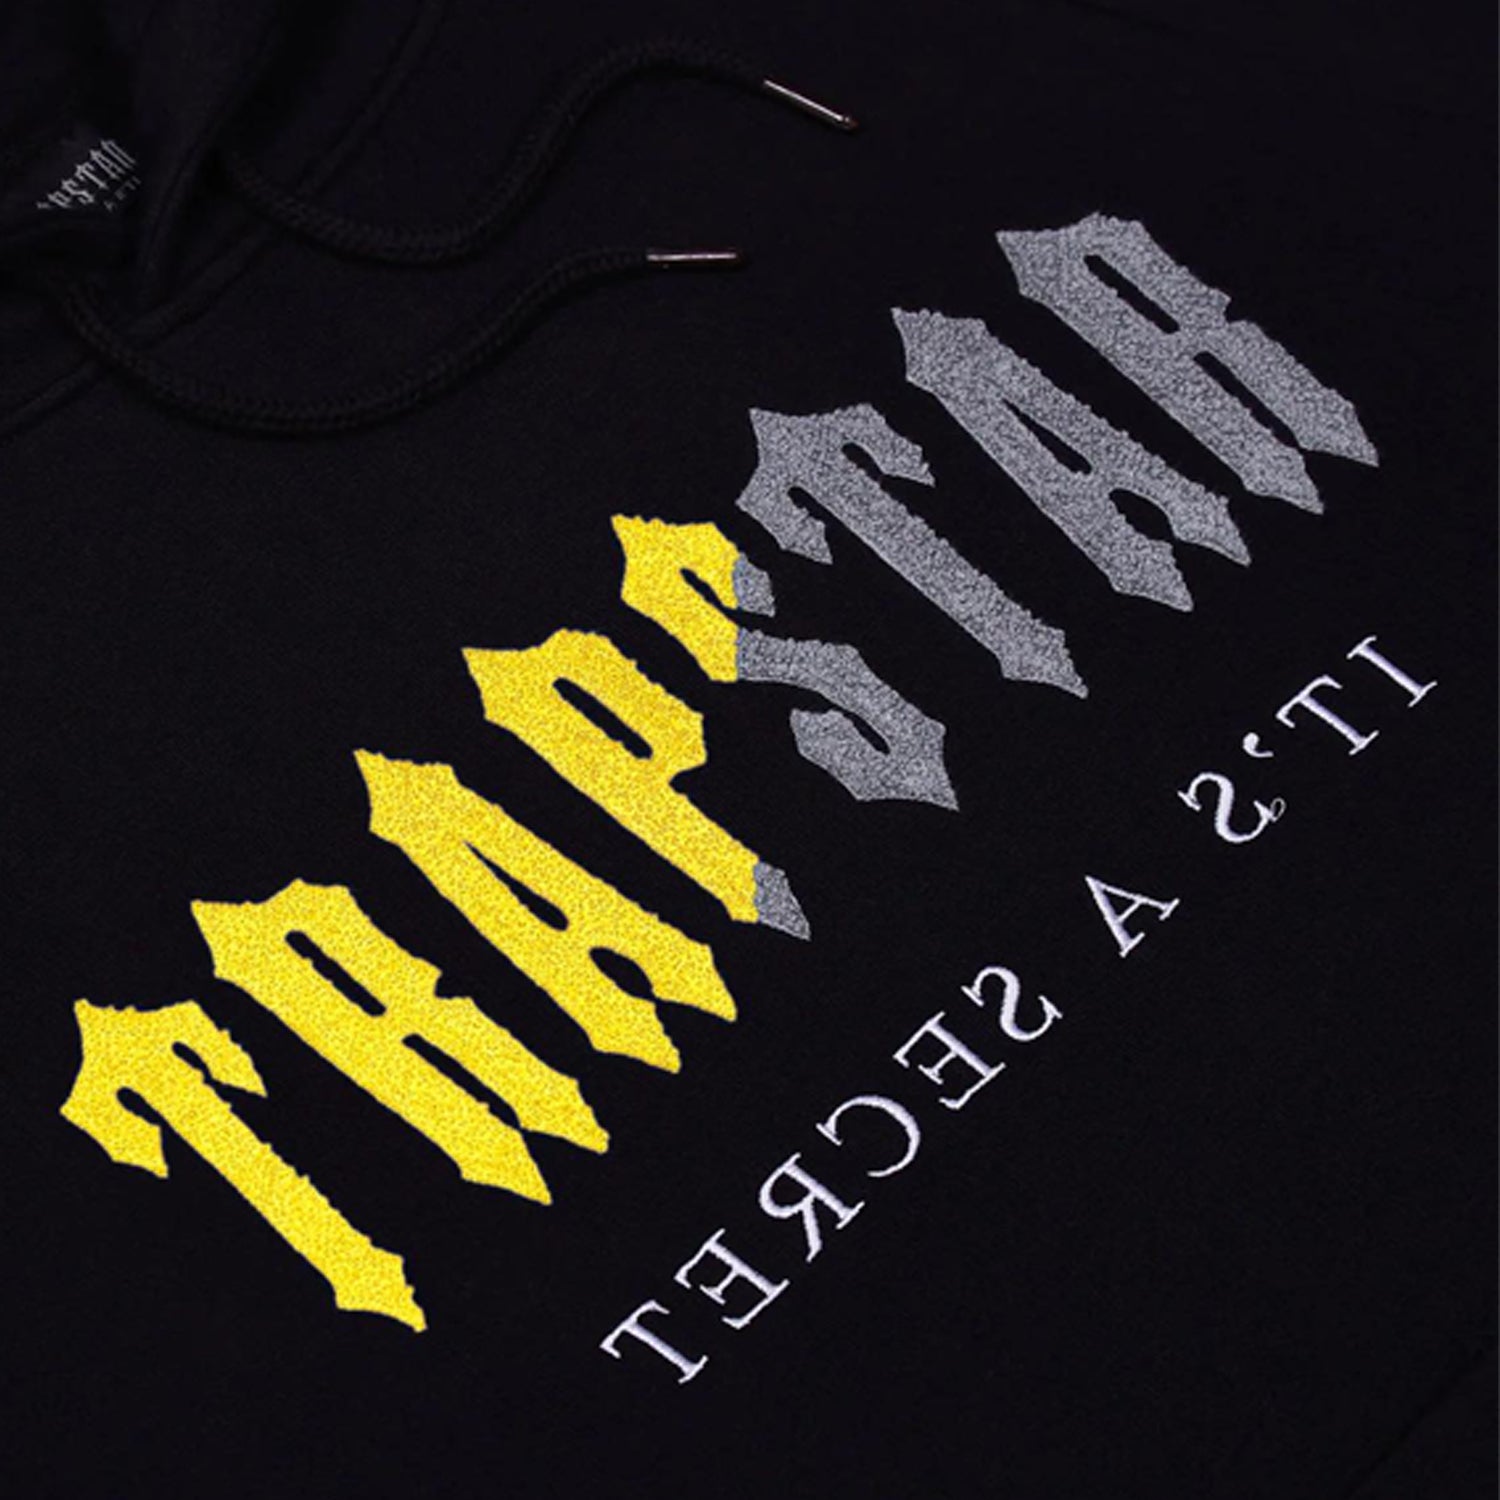 Trapstar Chenille Decoded Hooded Tracksuit - Black / Yellow